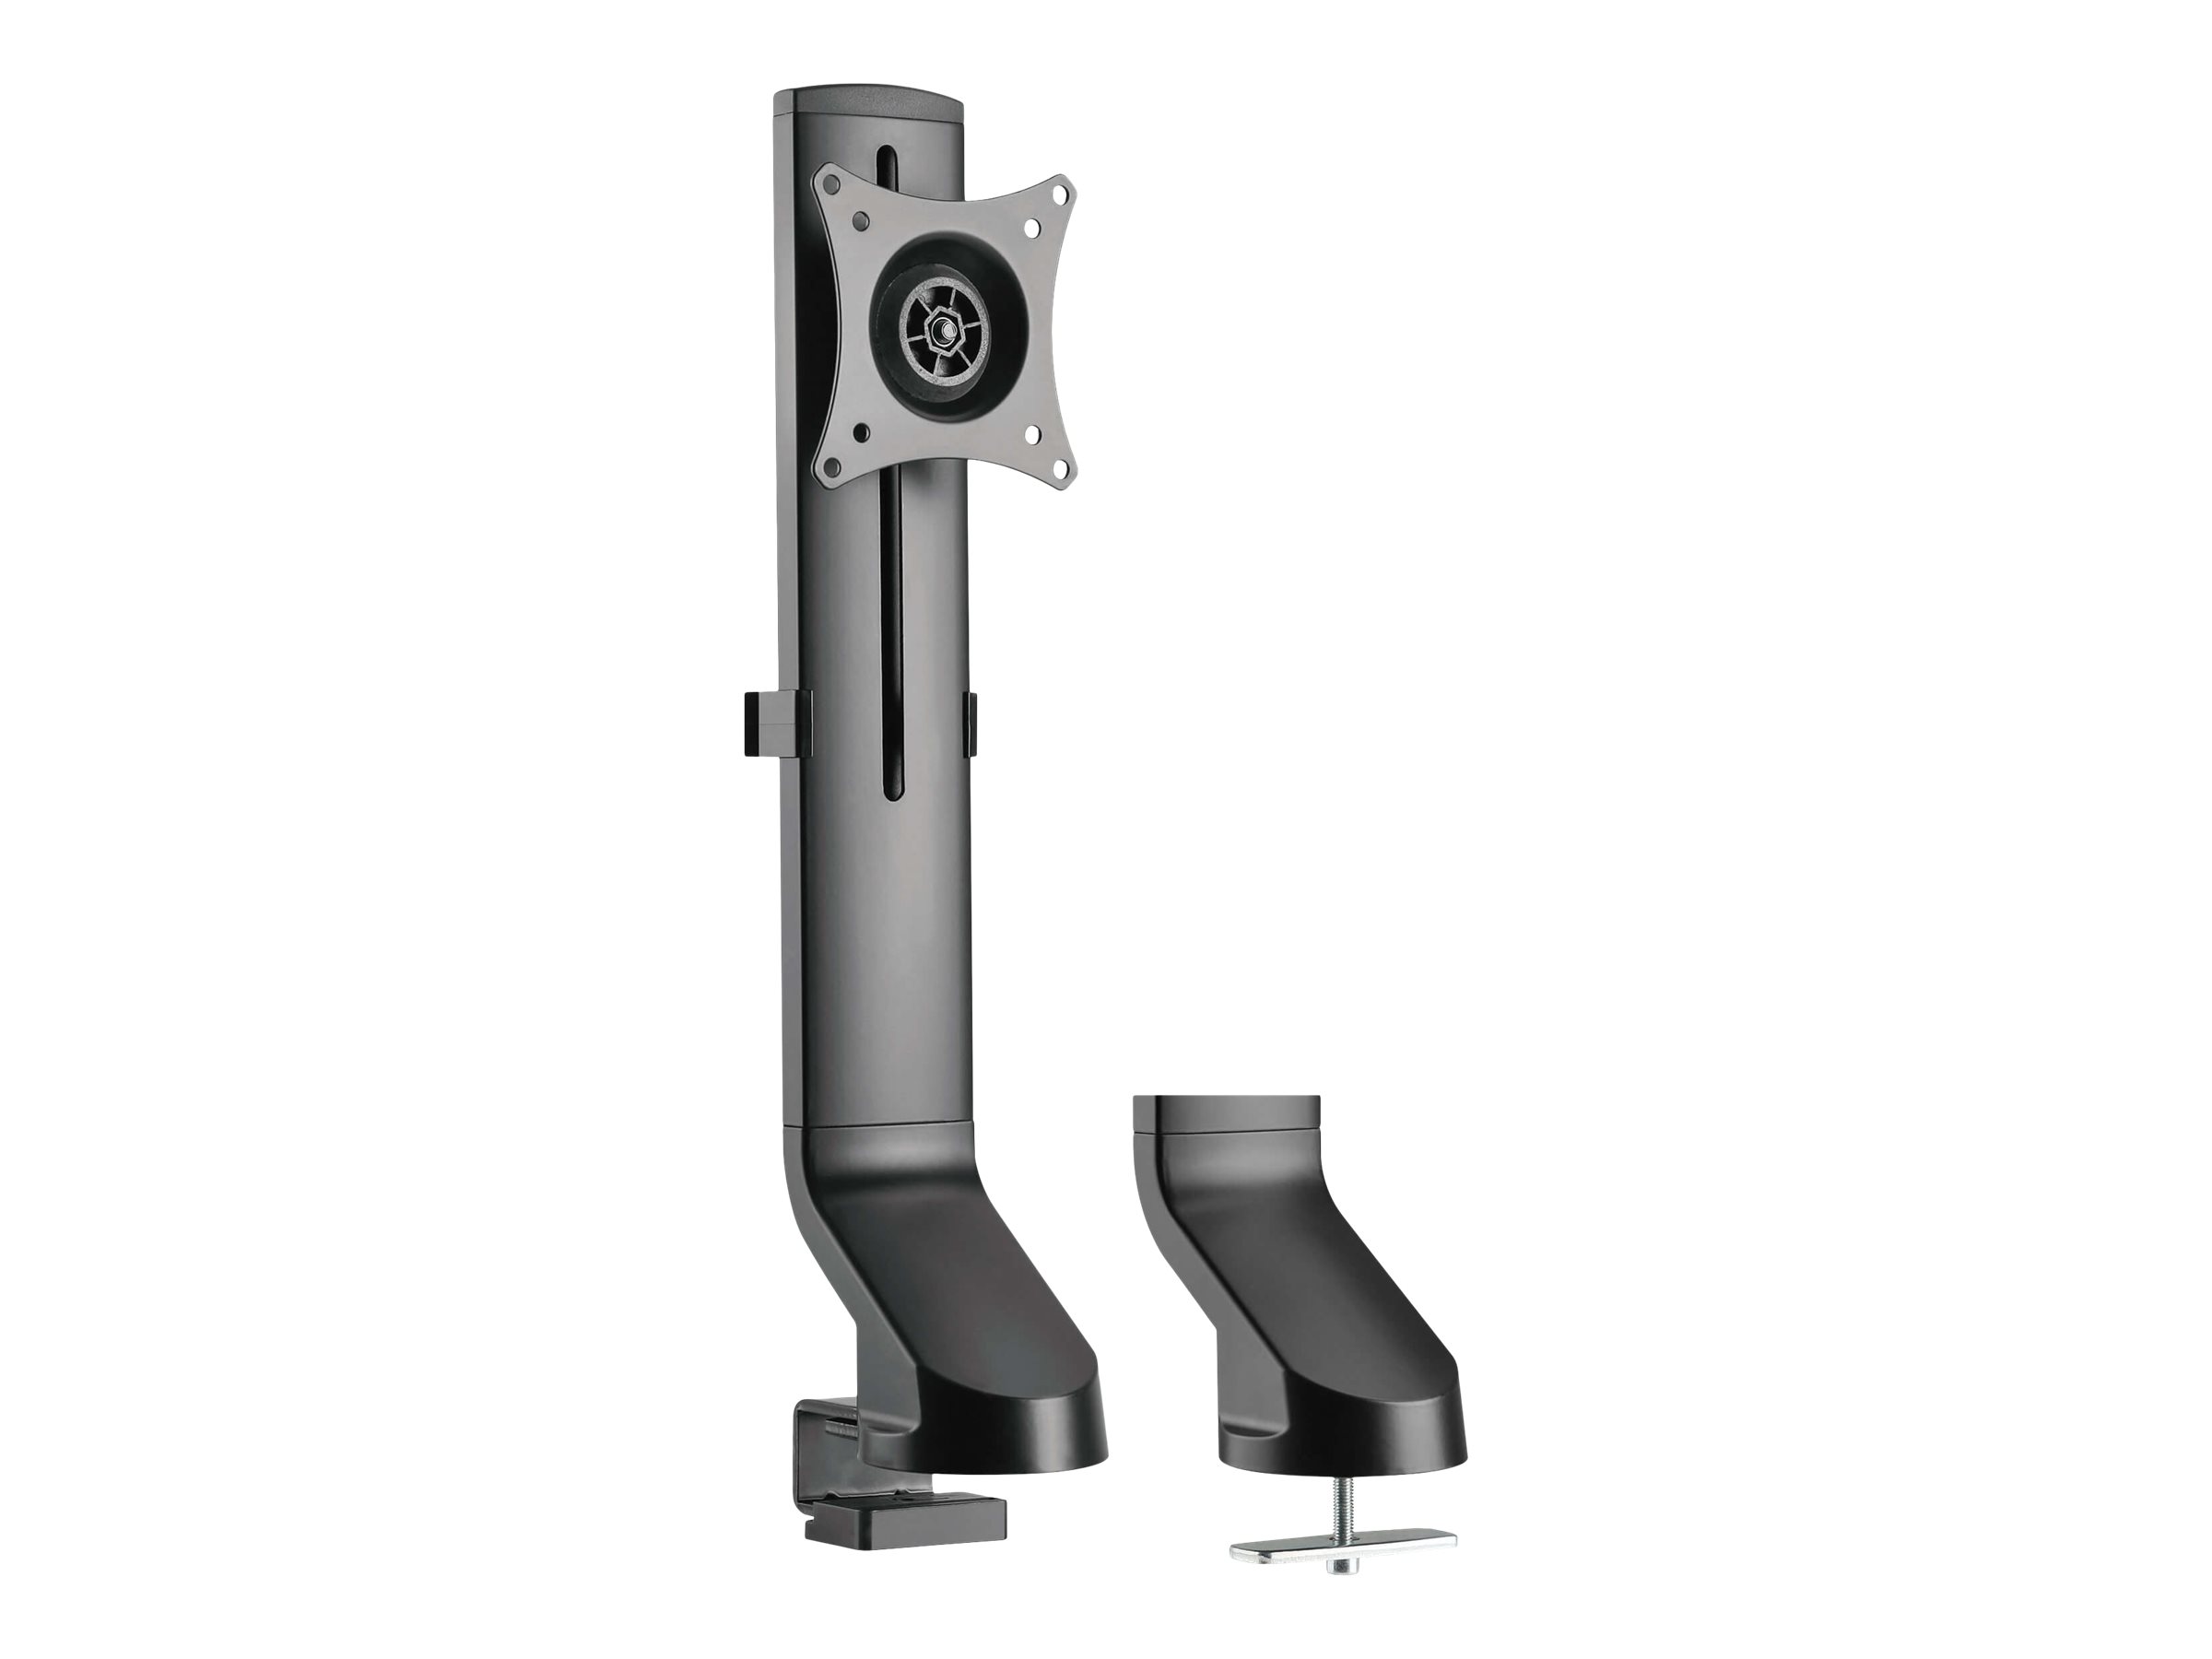 Tripp Lite Single-Display Monitor Arm with Desk Clamp and Grommet - Height Adjustable, 17